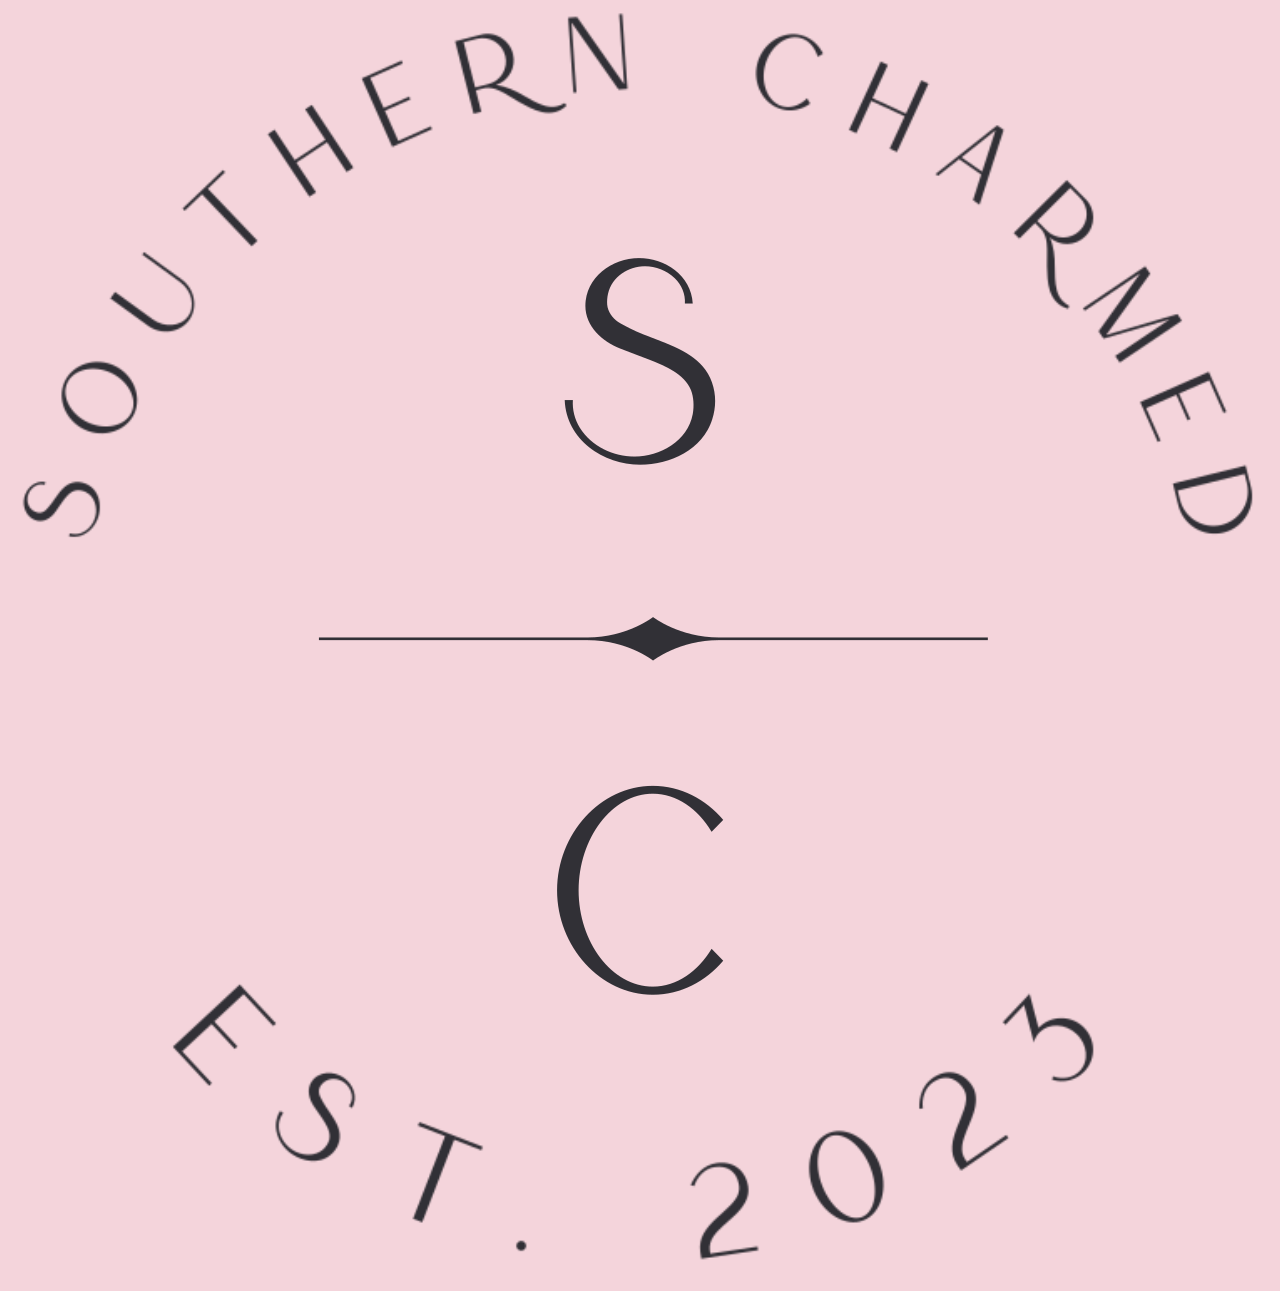 Southern Charmed's web page